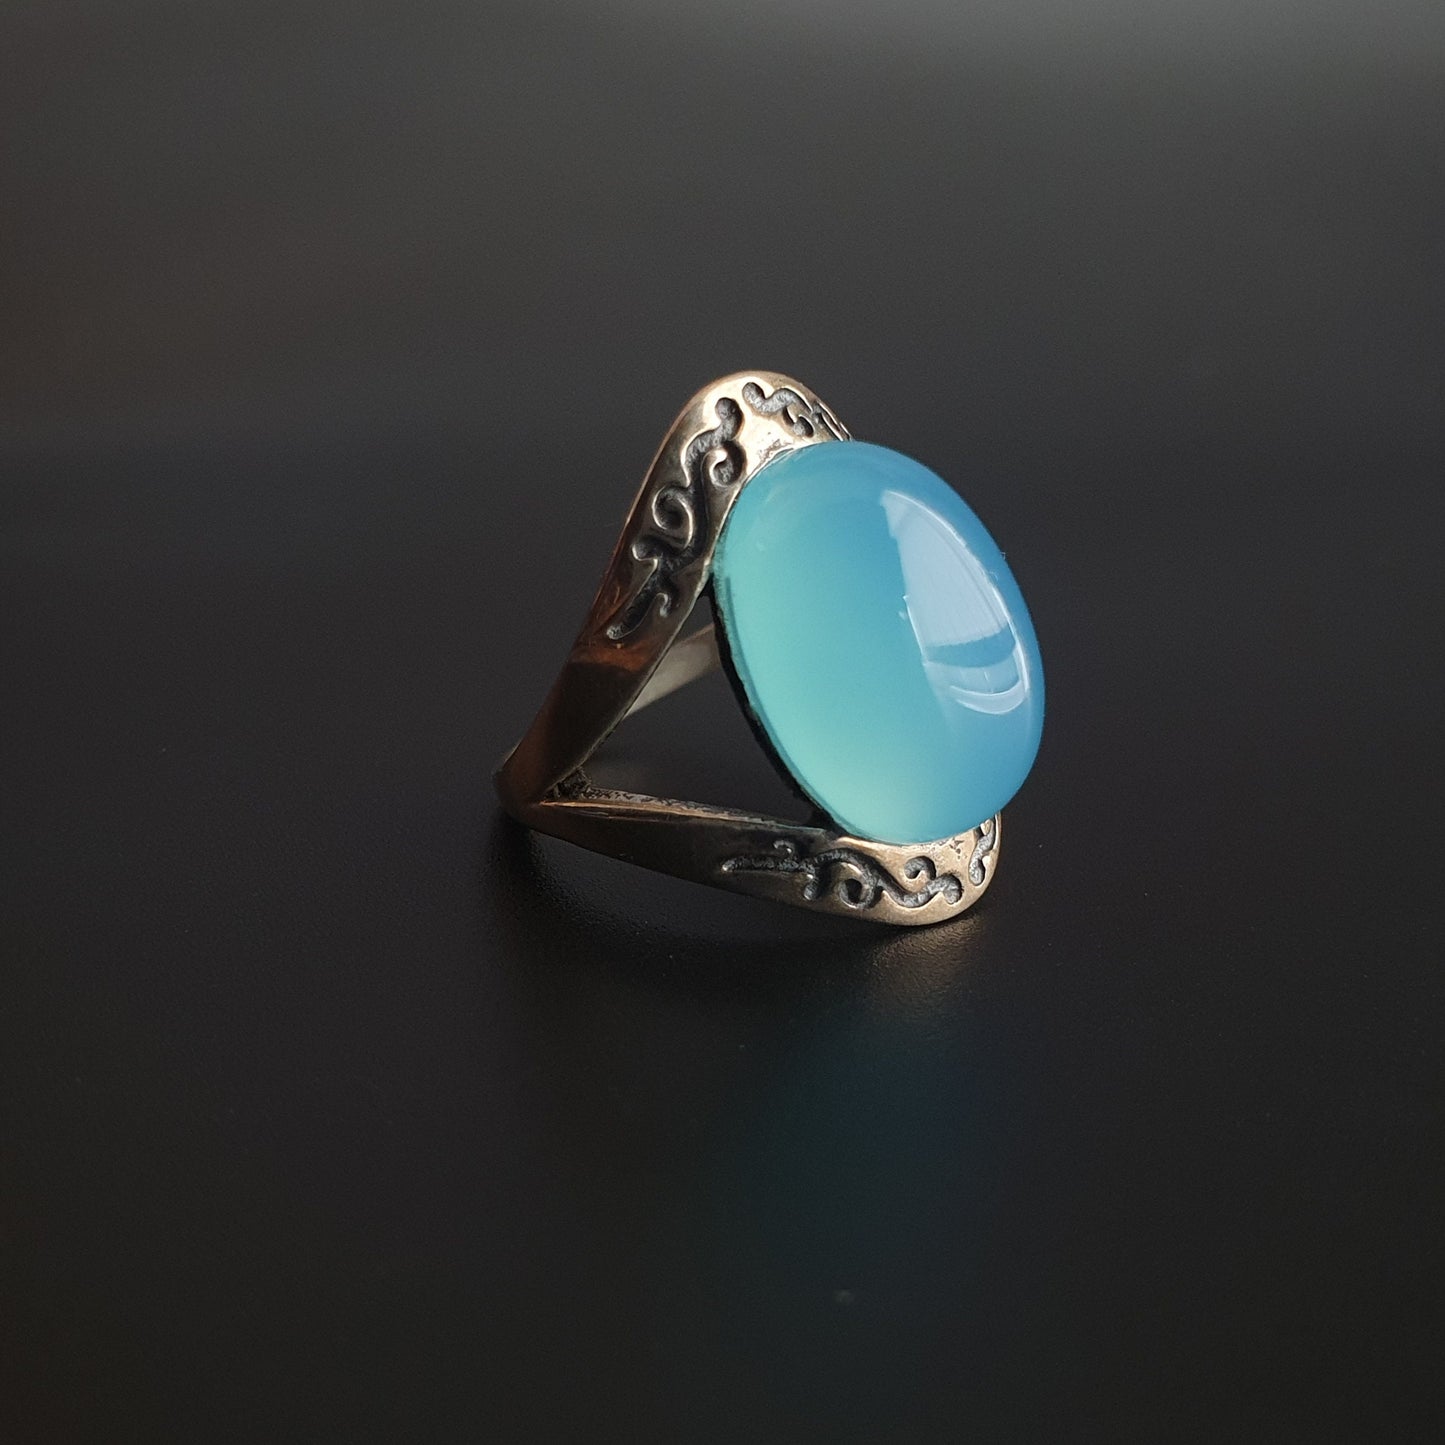 Silver ring, sterling, chalcedony,blue, beautiful, authentic,rings, jewelry, gifts, vintage, handmade,luxury, fast shipping, exclusive,925